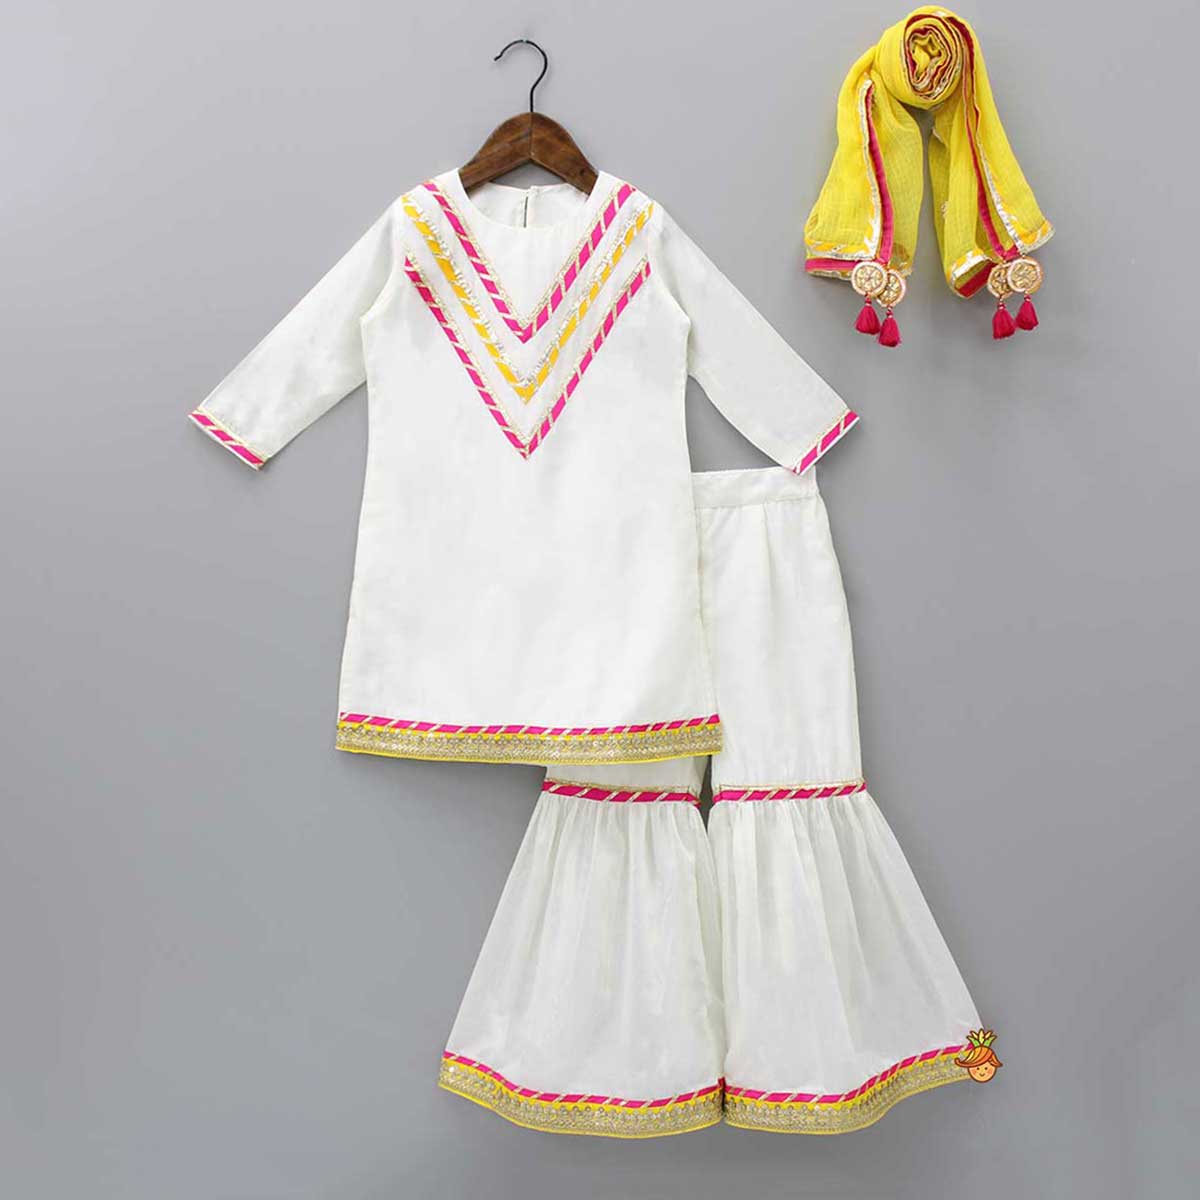 Pre Order: Gota Lace Detail Off White Kurti And Sharara With Fringes Enhanced Yellow Dupatta